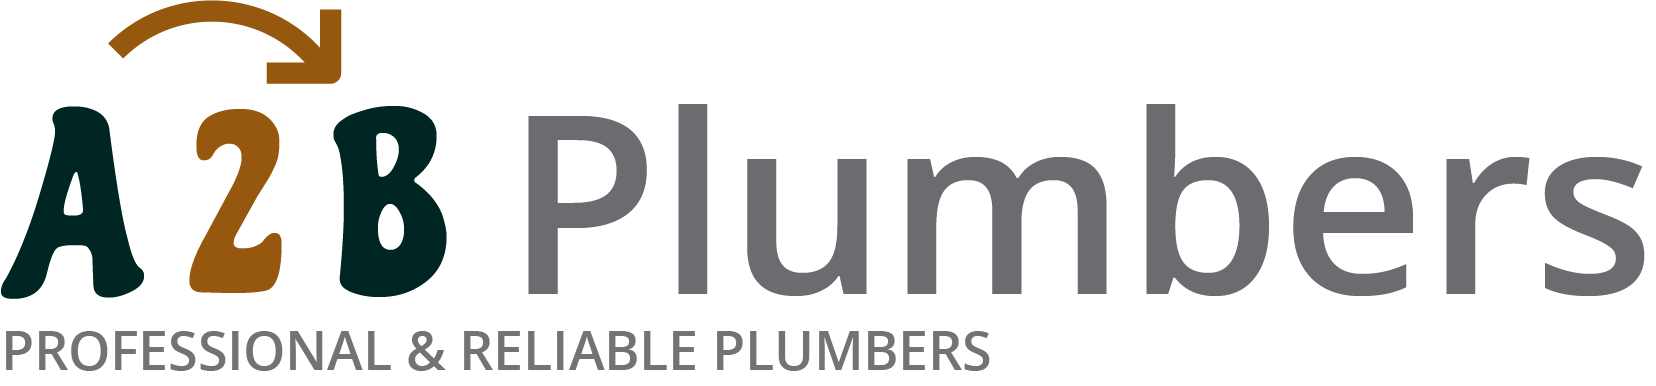 If you need a boiler installed, a radiator repaired or a leaking tap fixed, call us now - we provide services for properties in West Thurrock and the local area.